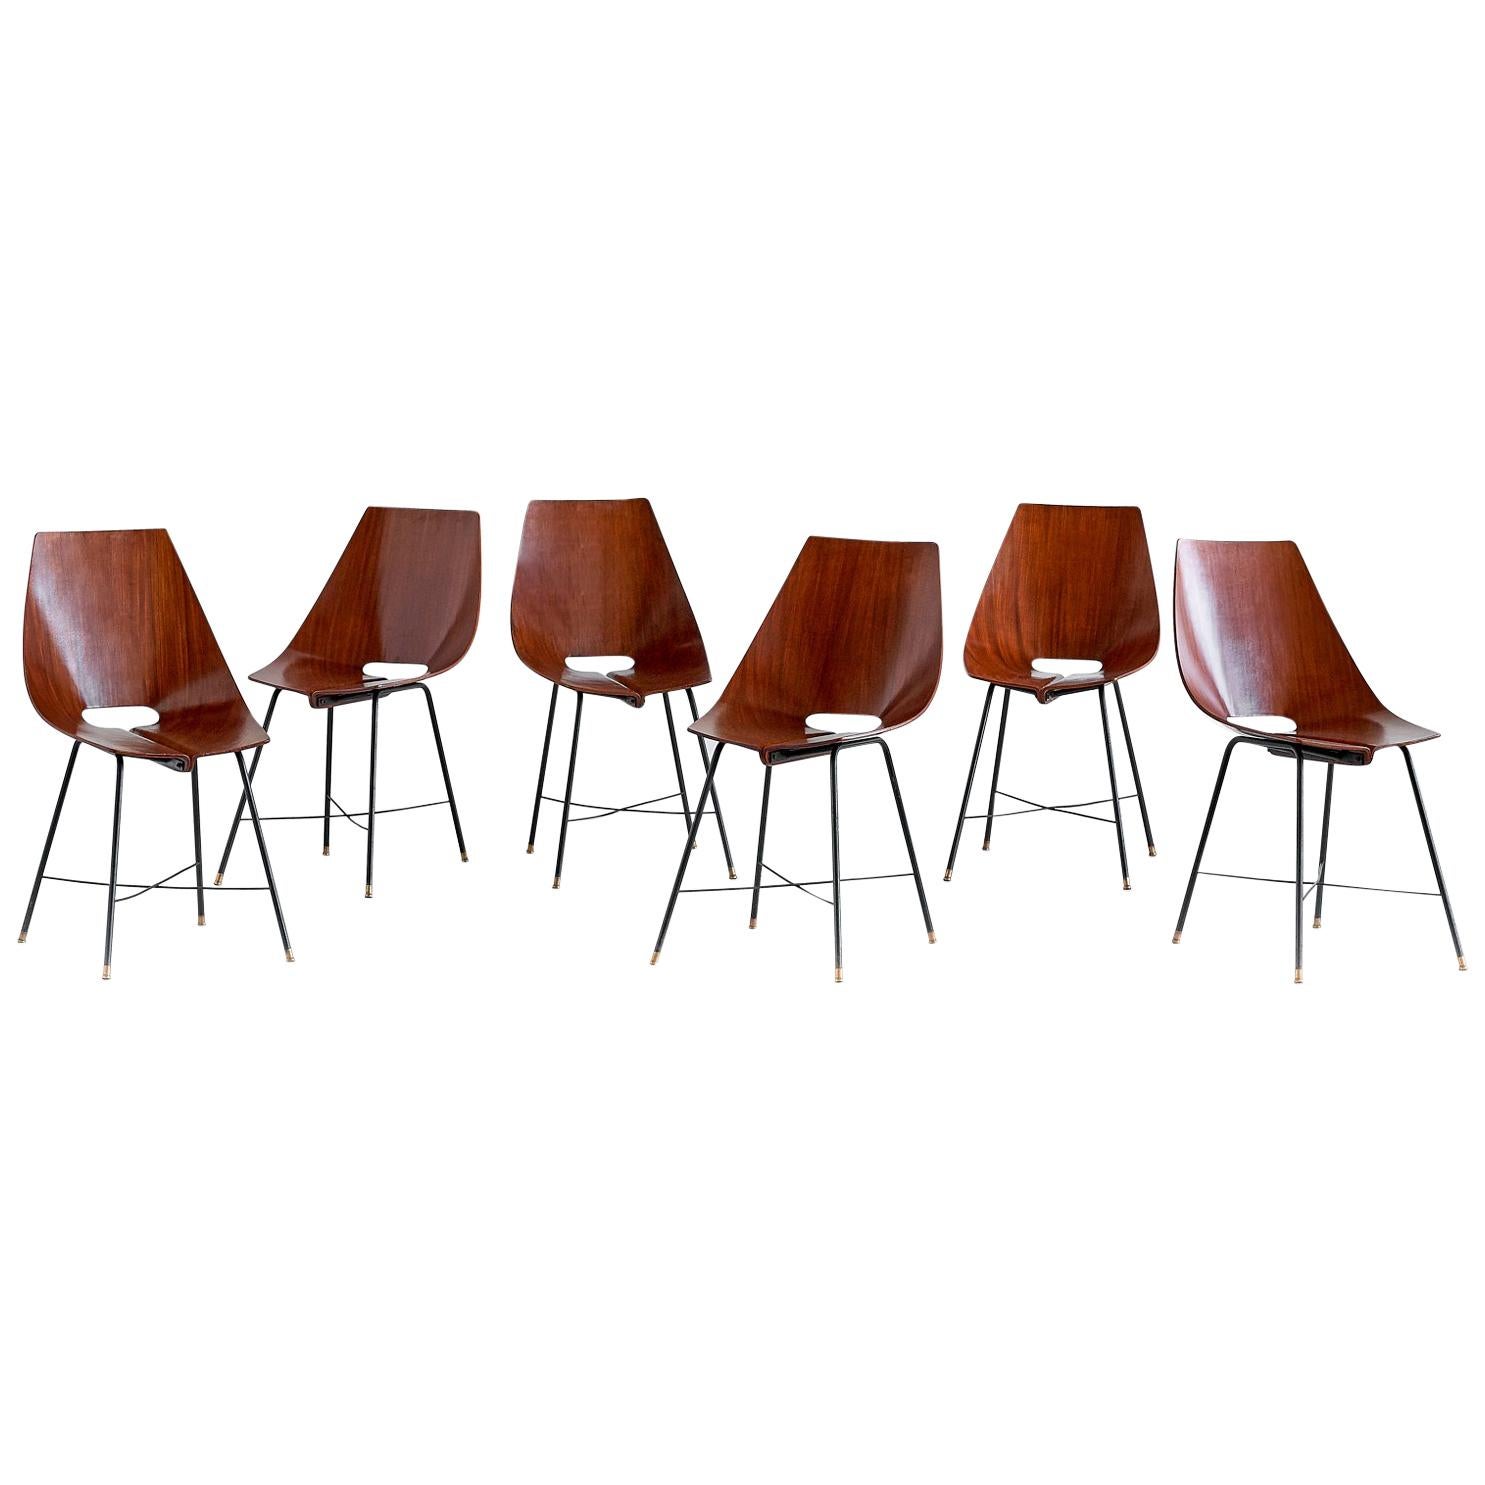 Set of Six Dining Chairs by Societá Compensati Curvati, Italy, 1959